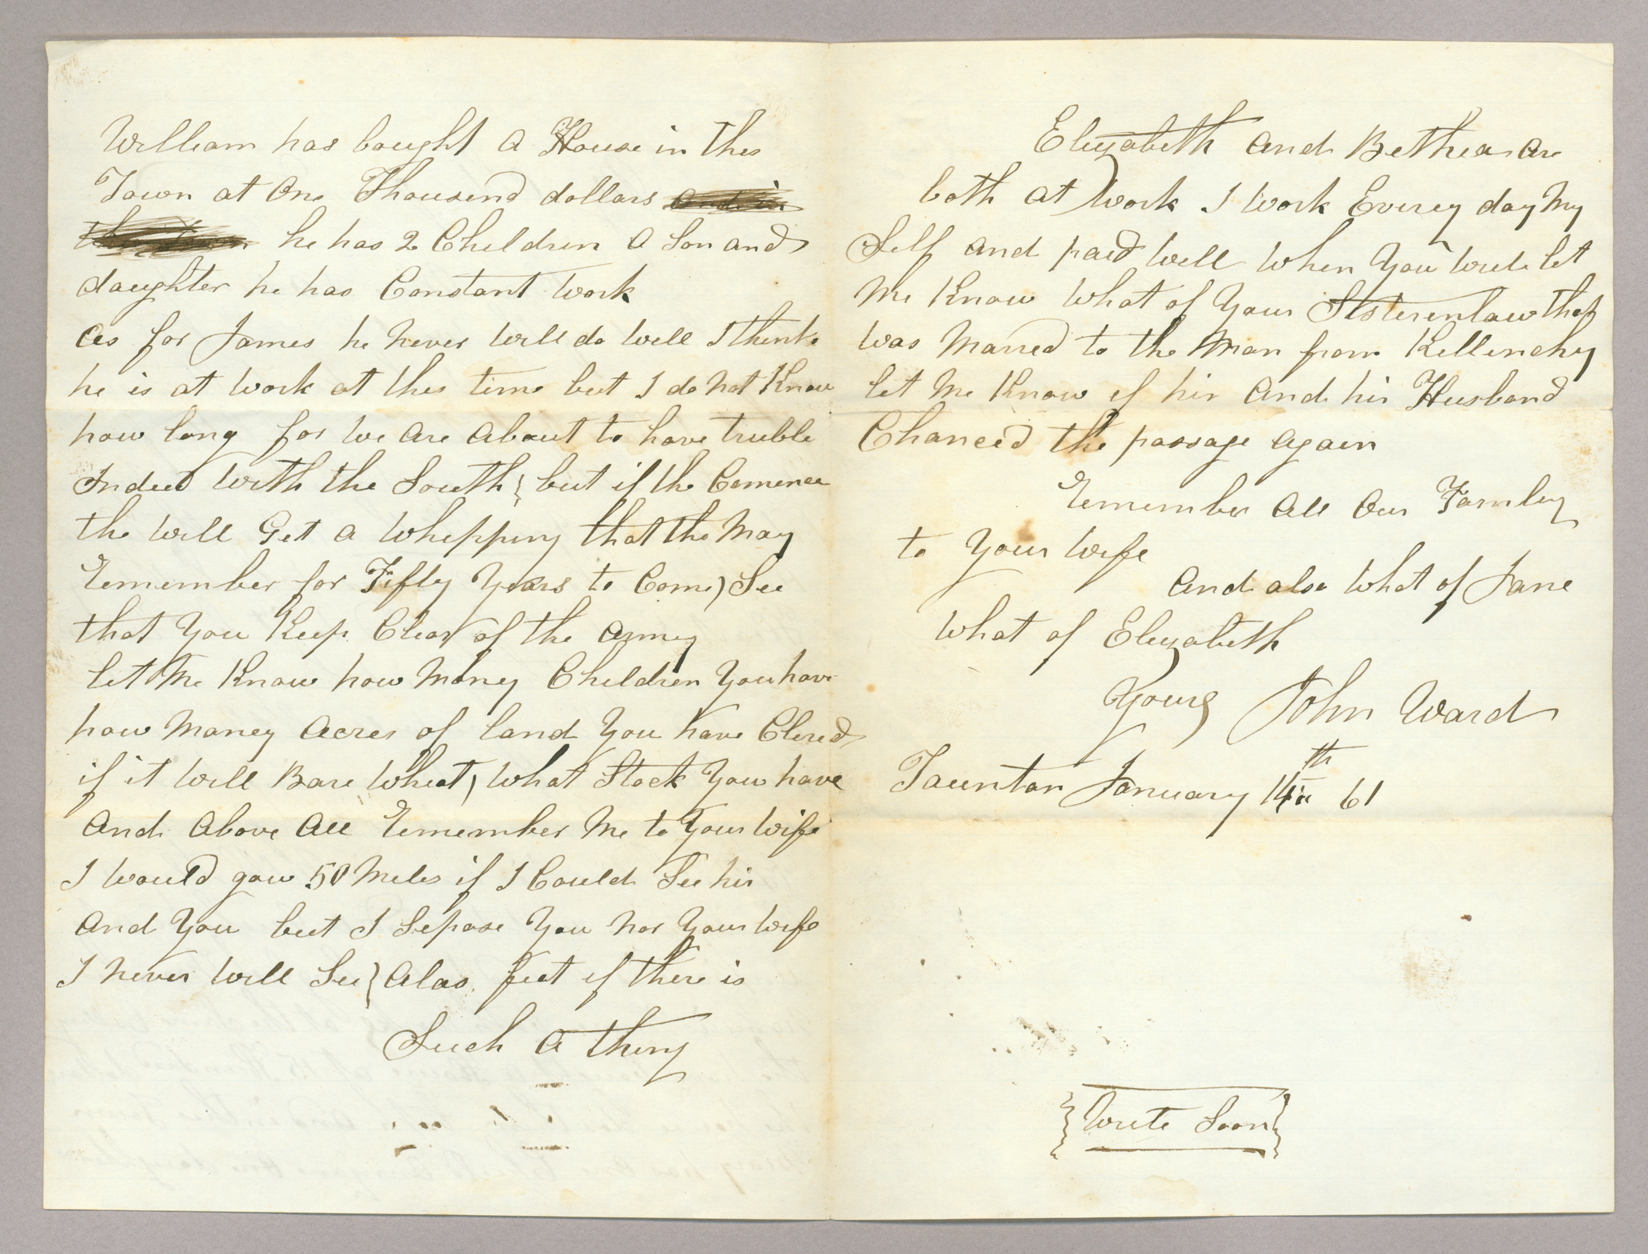 Letter. John Ward, Taunton, Massachusetts, to "My Old friend" [John E. Brownlee], n. p., Pages 2-3